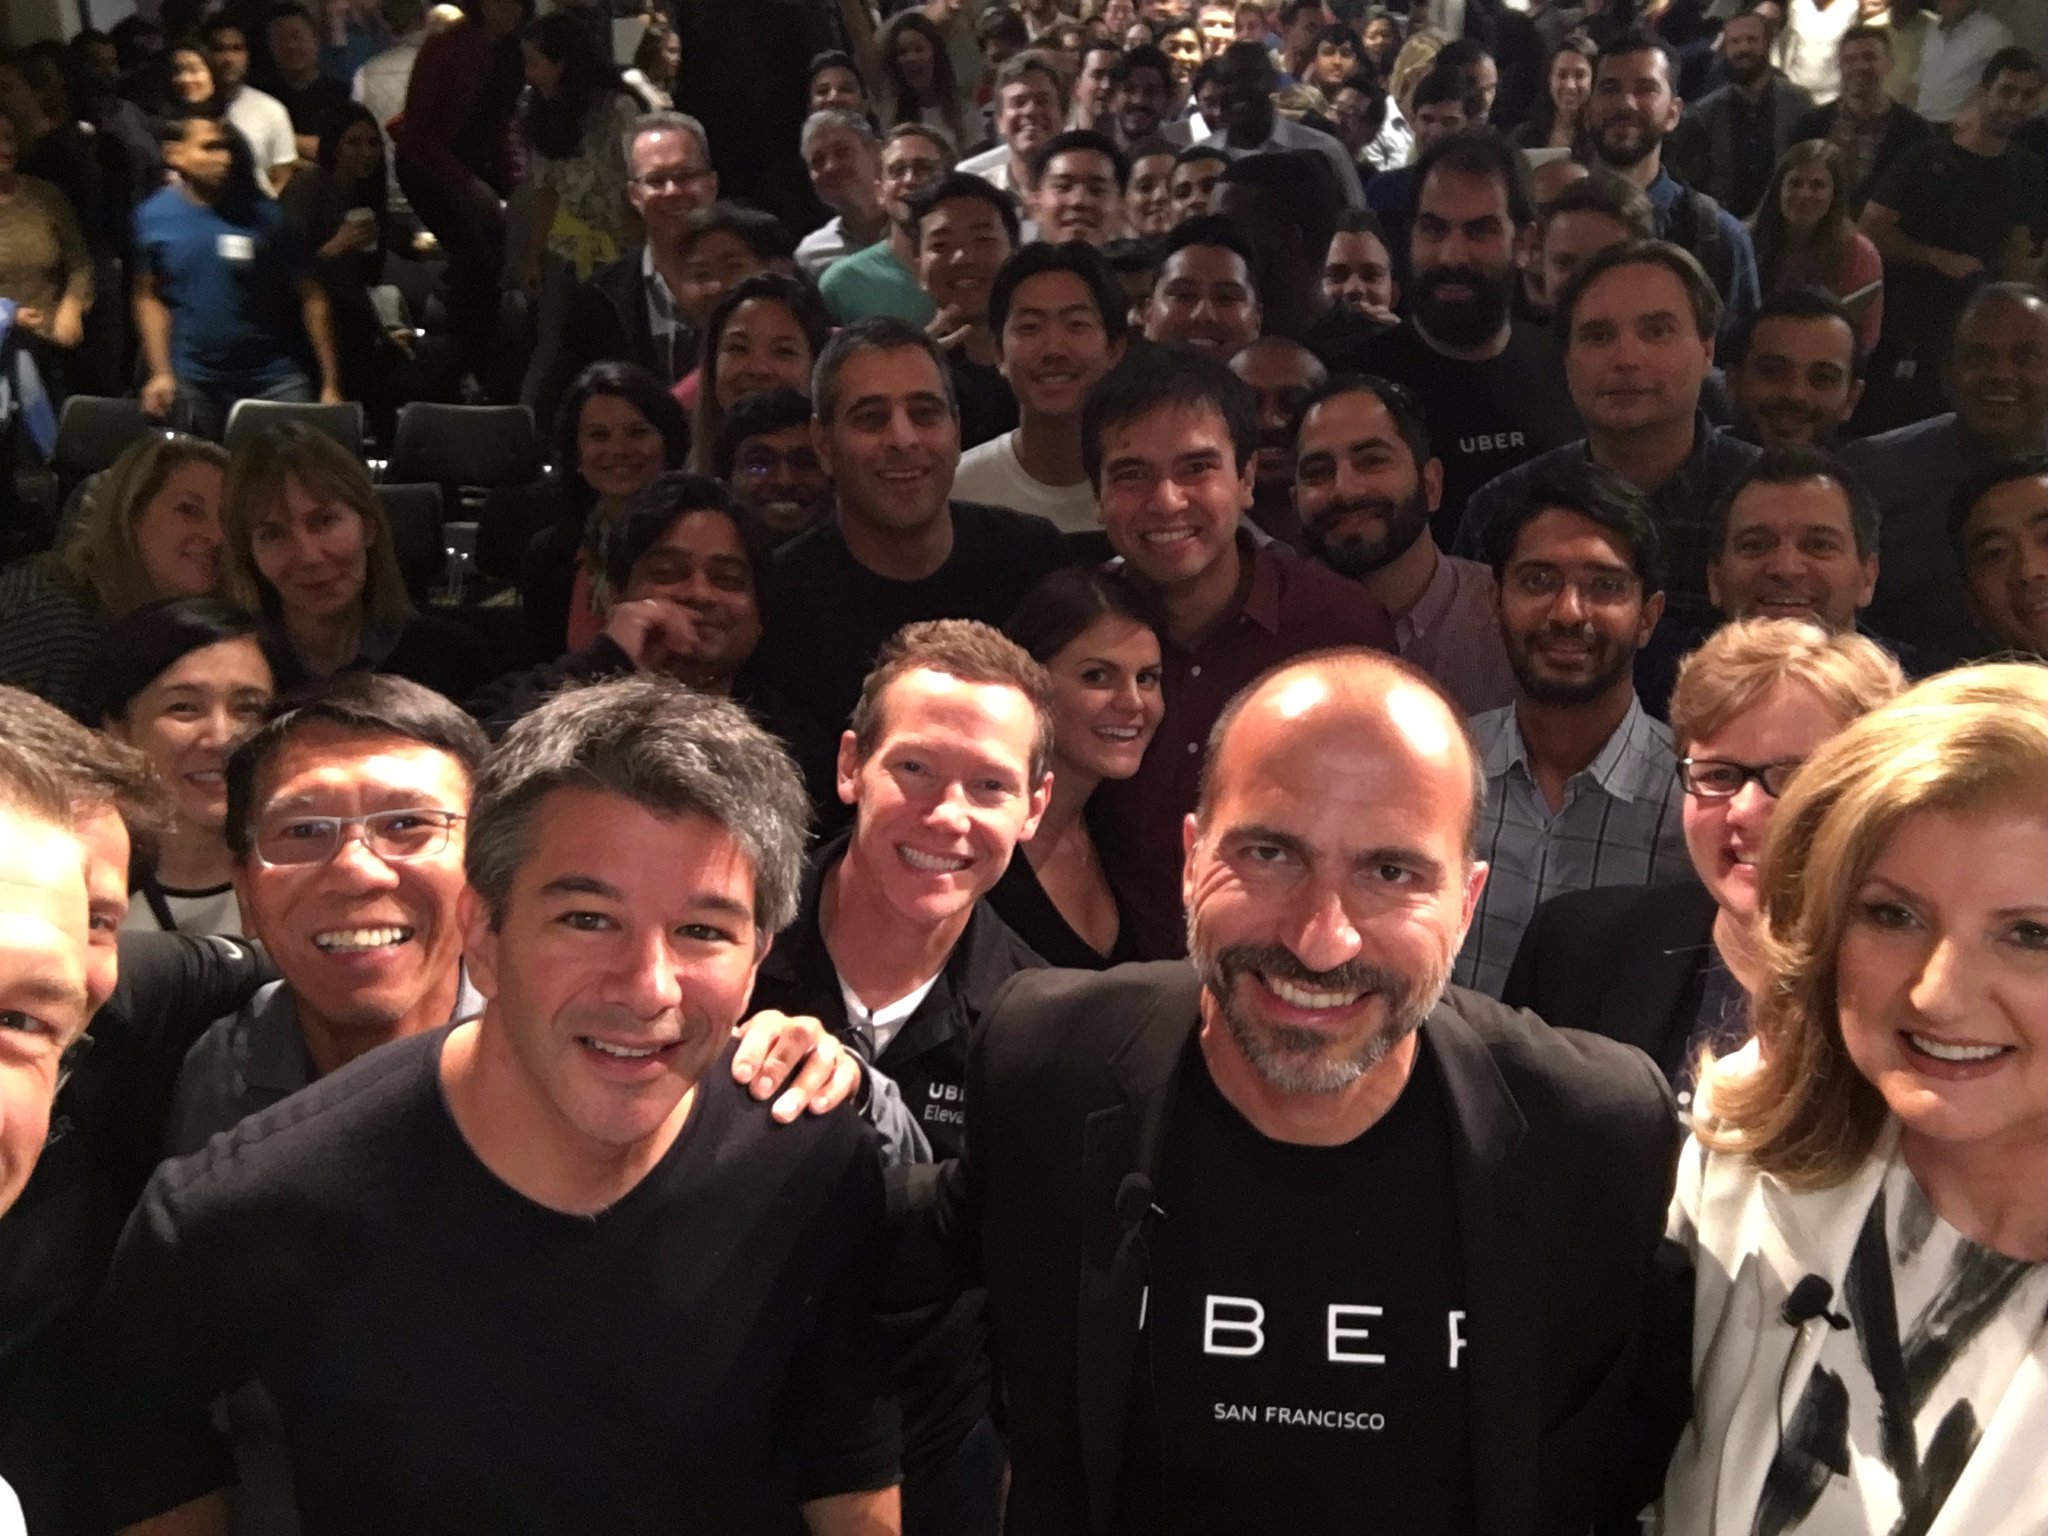 A selfie of Uber employees featuring former CEO Travis Kalanick, current CEO Dara Khosrowshahi and board member Arianna Huffington